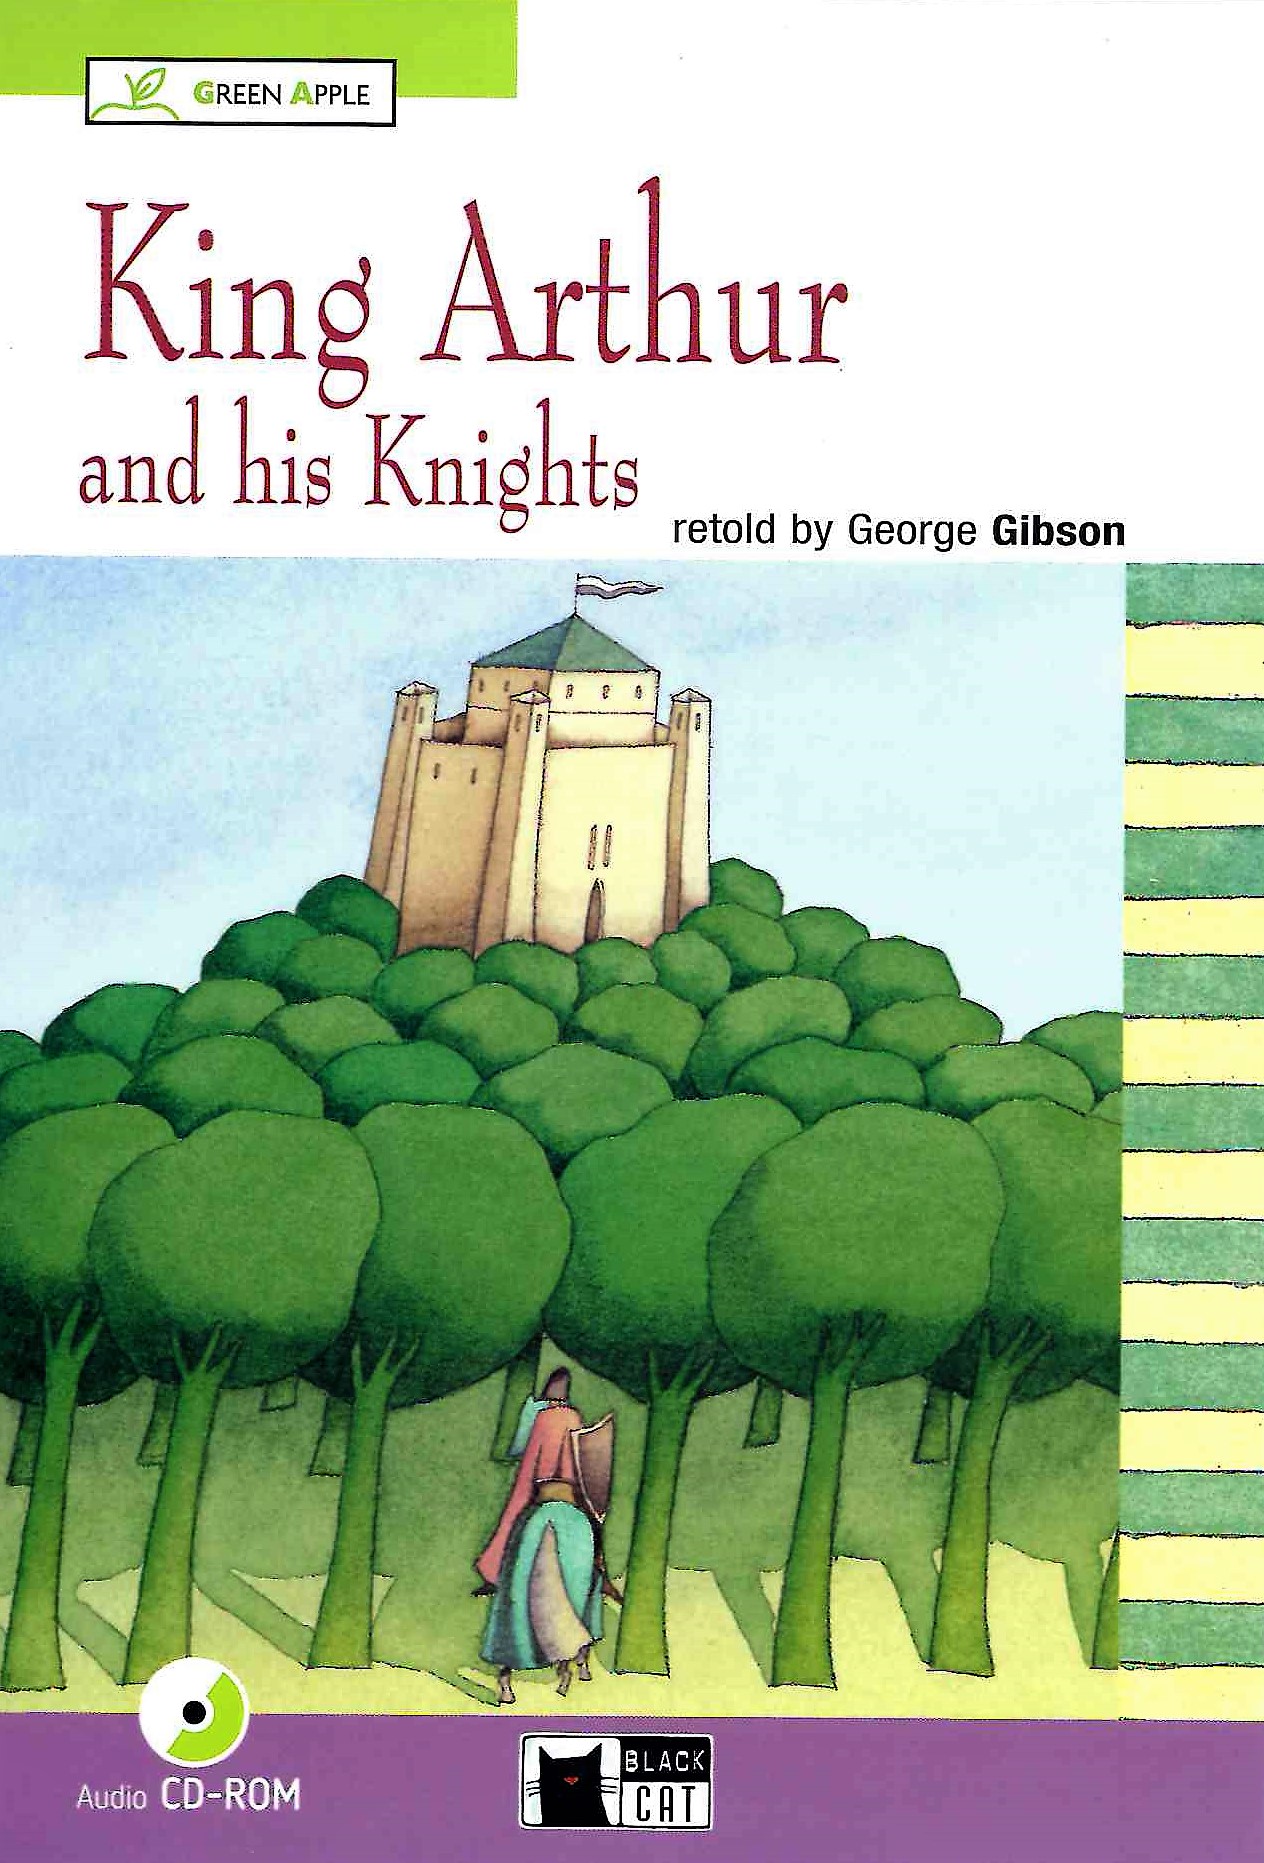 King Arthur and his Knights + Audio CD-ROM